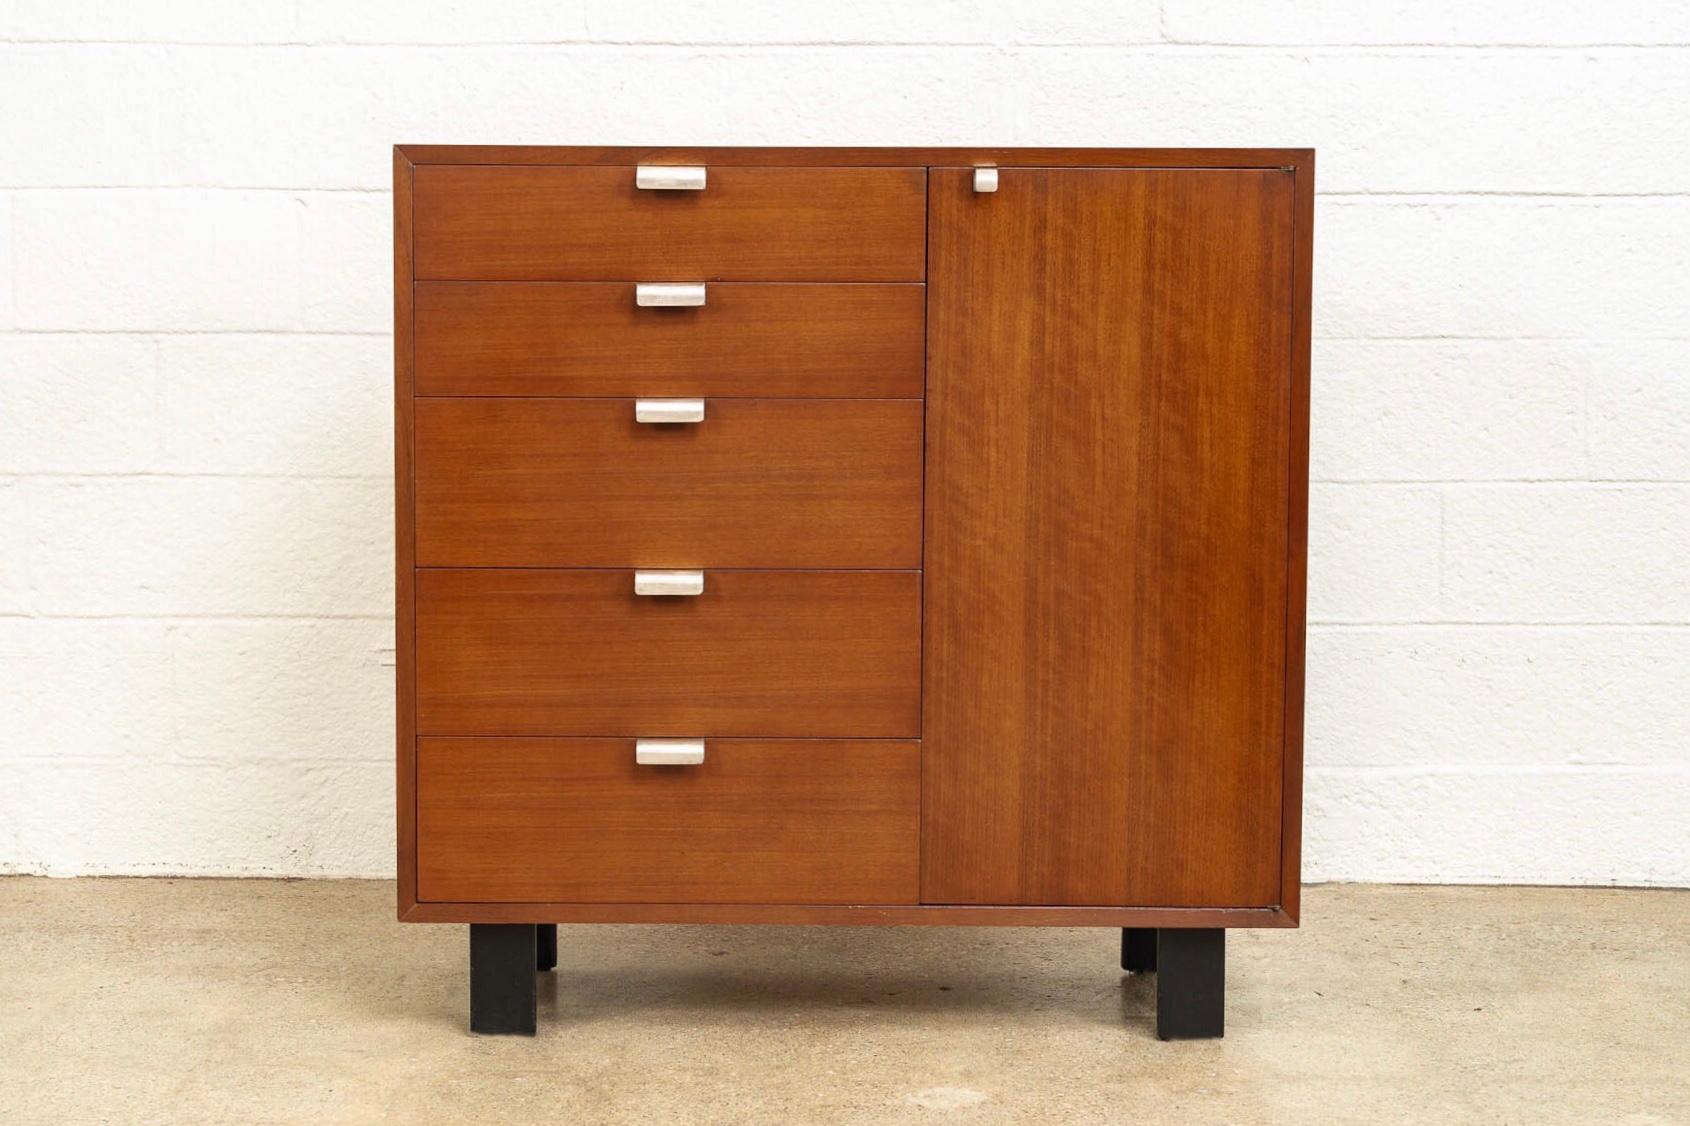 This Mid-Century Modern cabinet was designed by George Nelson for Herman Miller in 1946 for his “Basic Series” of modular furniture that coordinate in size, shape, and design and includes the now iconic Nelson platform bench. With clean, rectilinear